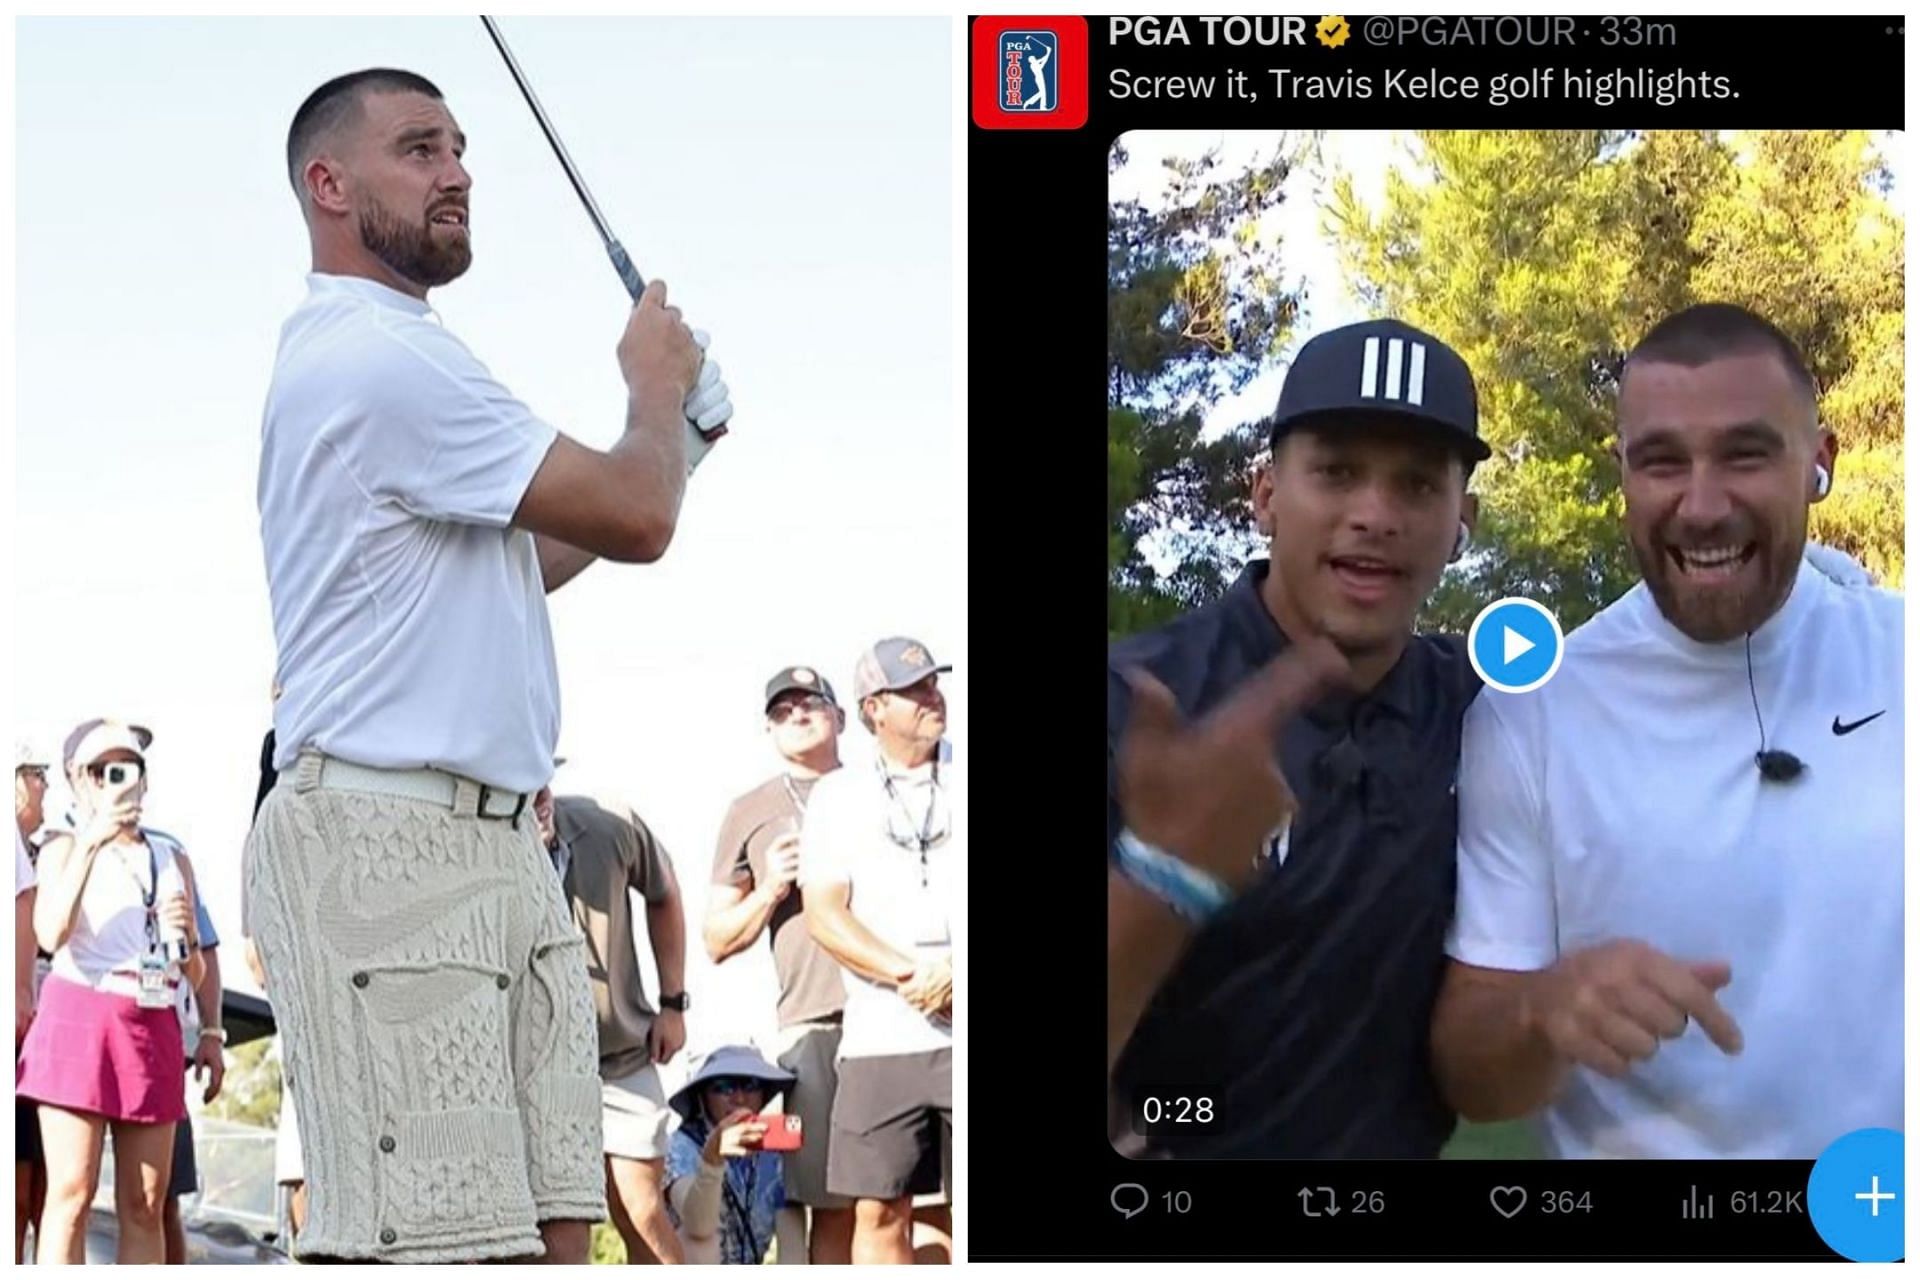 PGA Tour posted Travis Kelce golf highlights on X, only to delete it after sometime (First Image via Getty, second Image via?(Twitter.com/Nuclr golf)